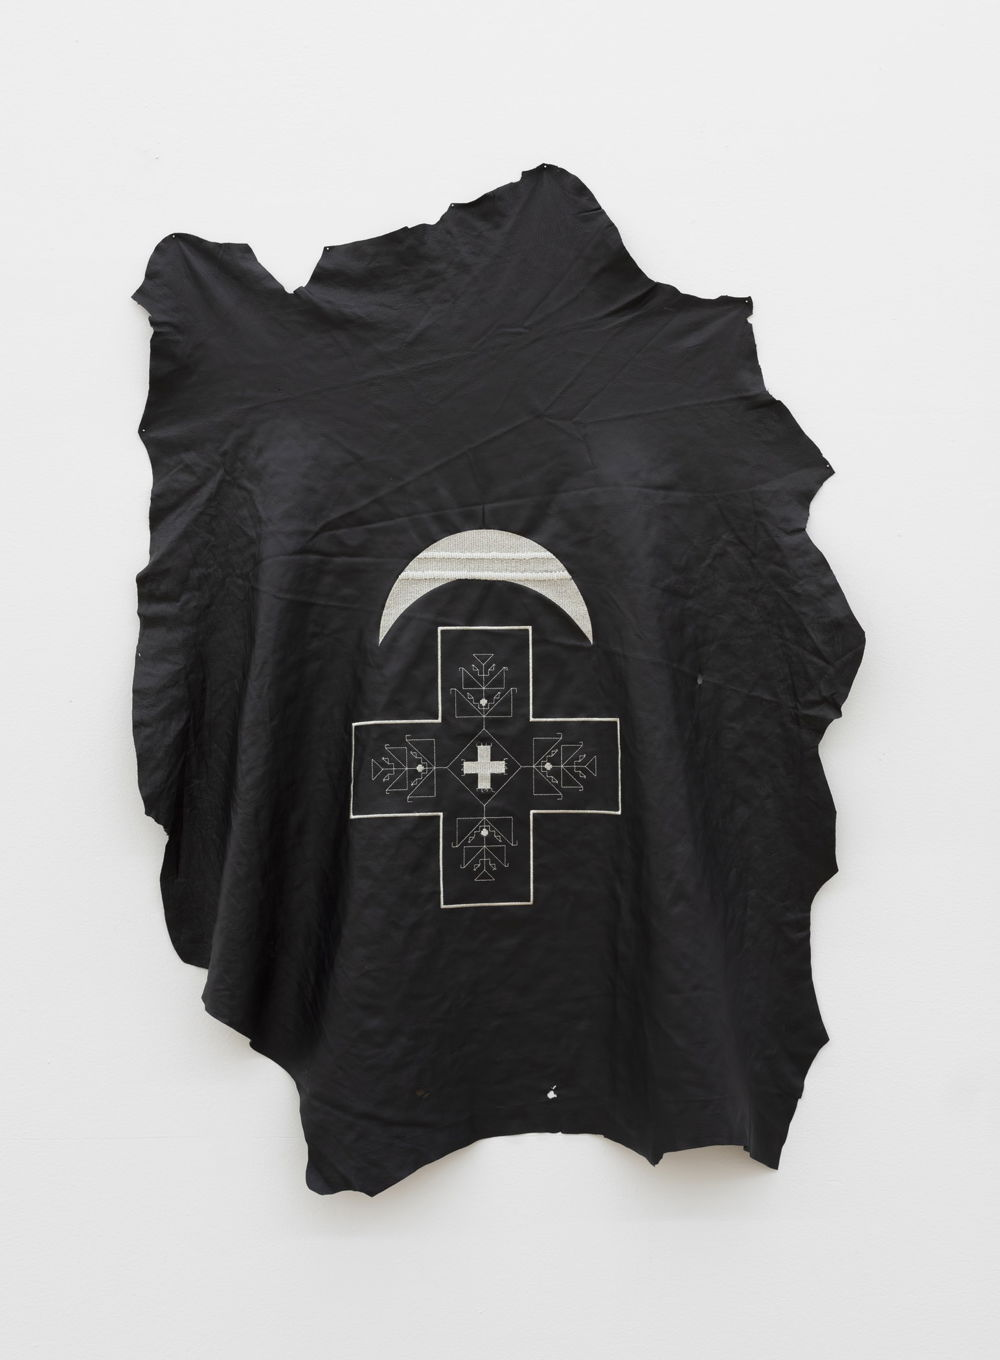 A piece of wrinkled black fabric on a white backdrop. Printed on the fabric is an upside-down crescent moon over a cross.